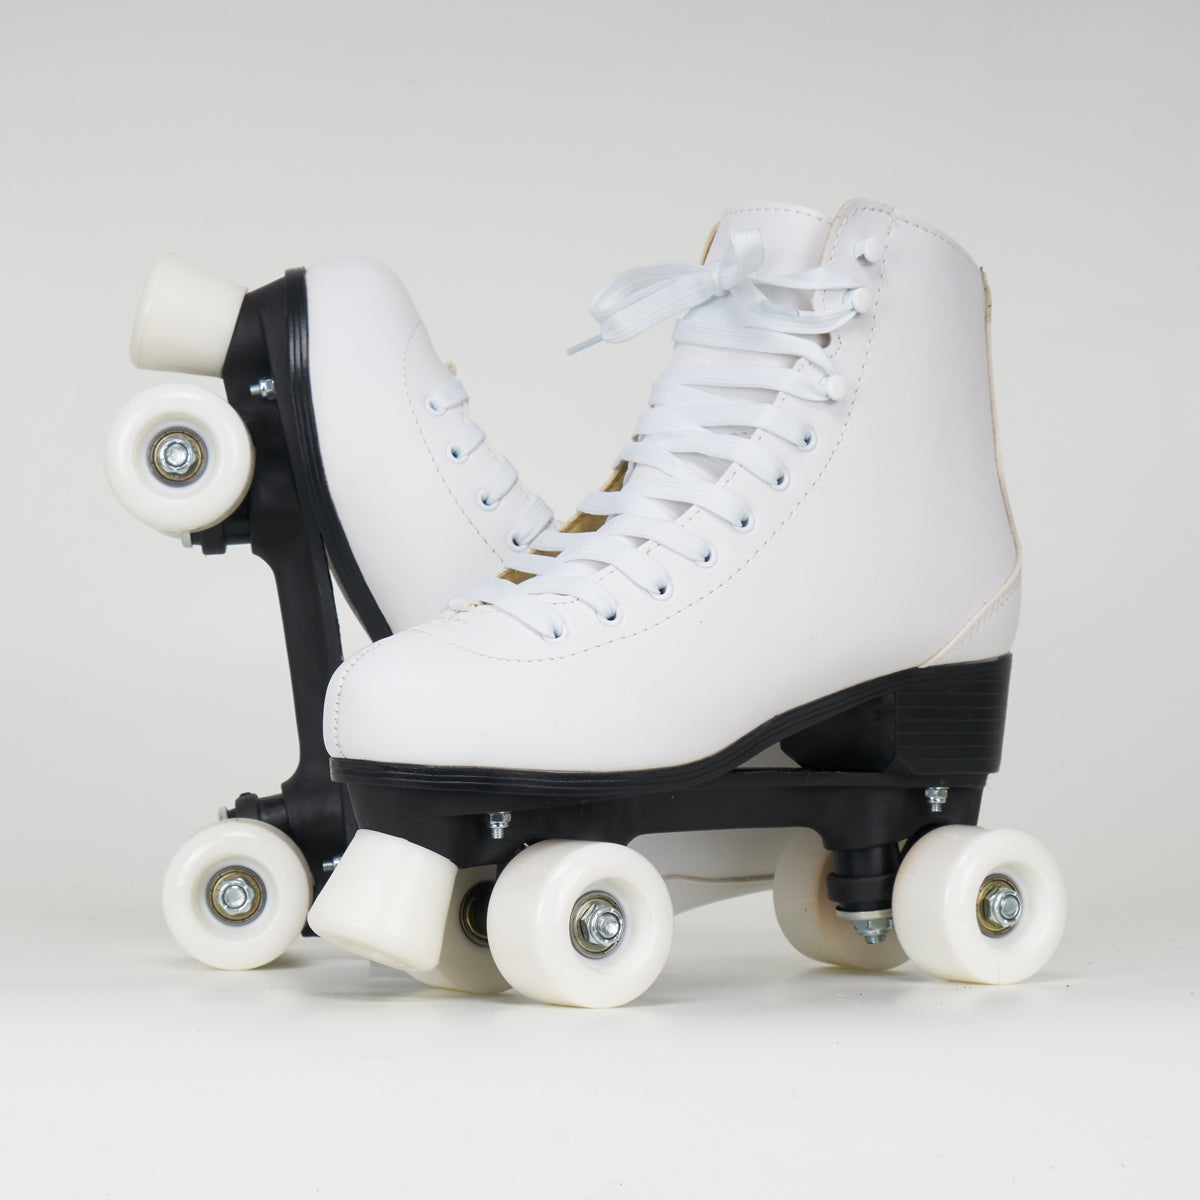 Roces RC1 Classic Rollerskates - White